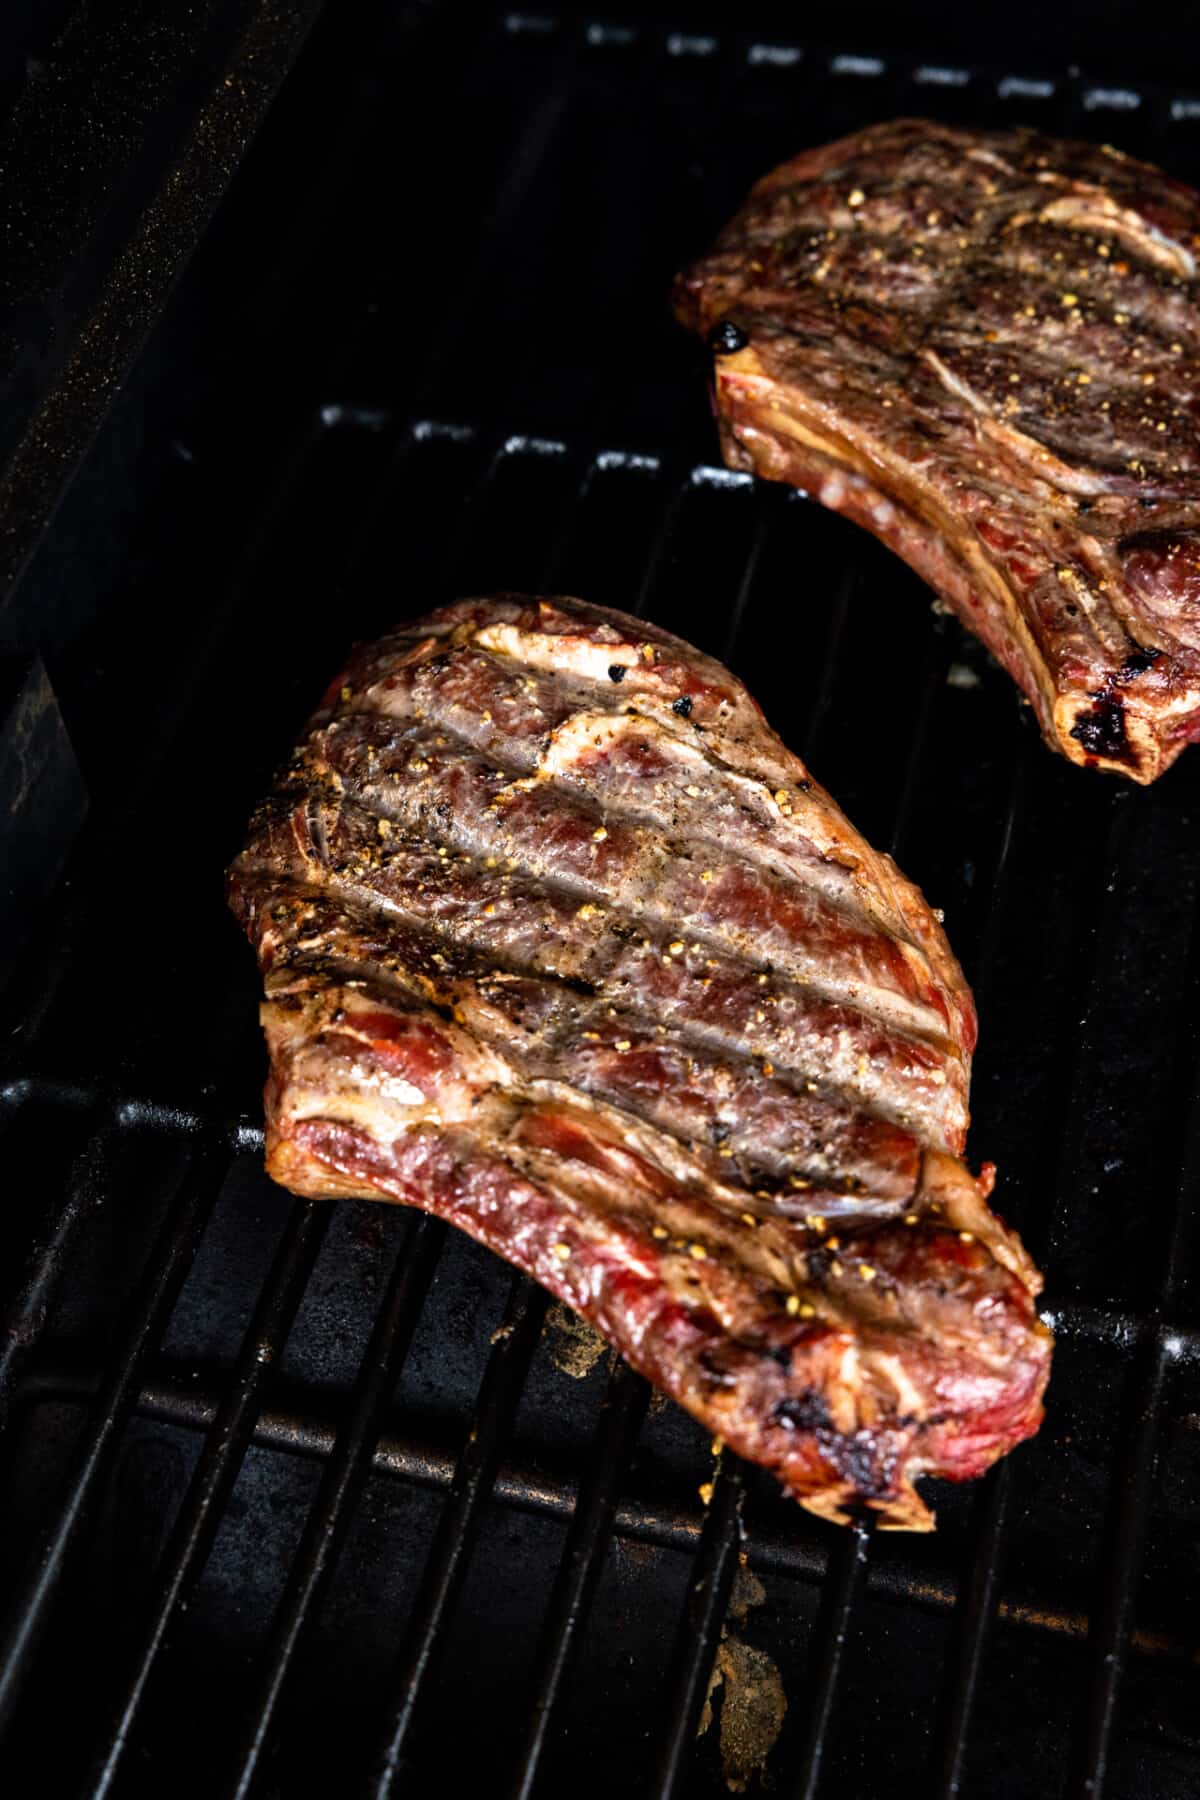 Ribeye steaks on a grill during smoking.